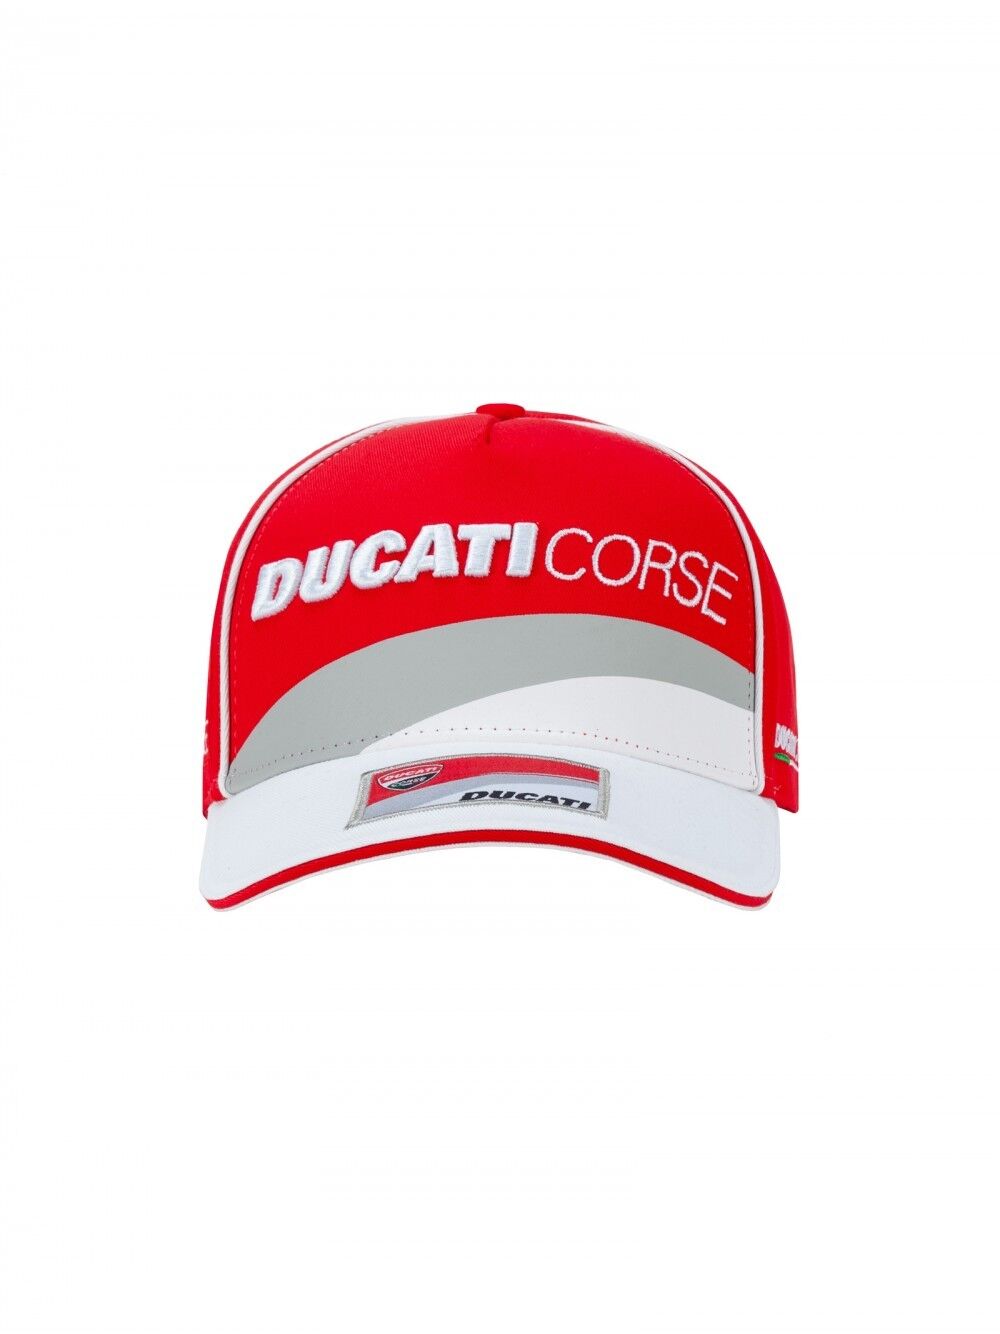 Official Ducati Corse Patch Red Cap - 18 46002